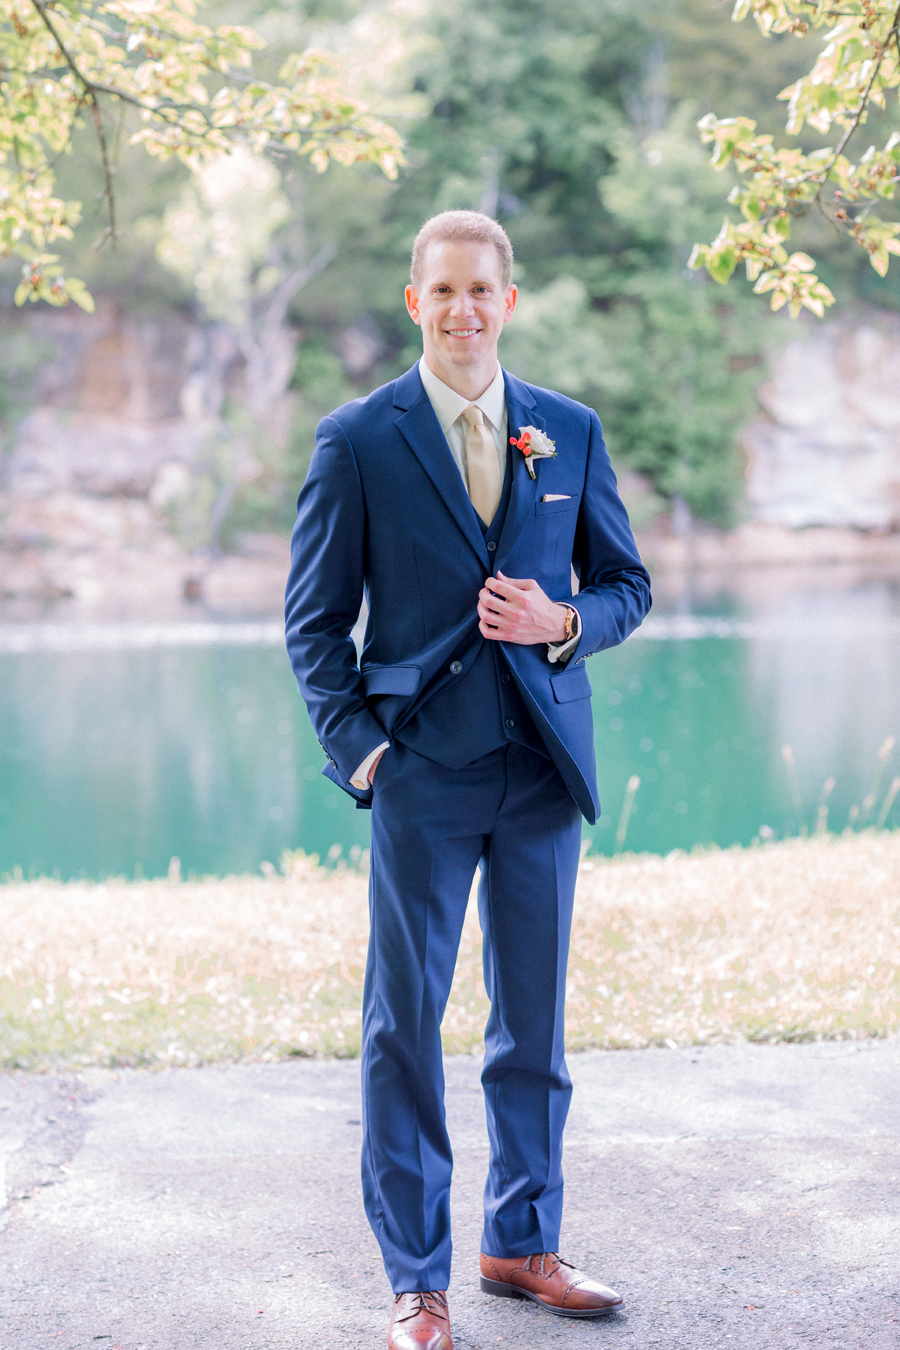 A groom poses in front of the water and cliffs at Wildcliff Weddings and Events.